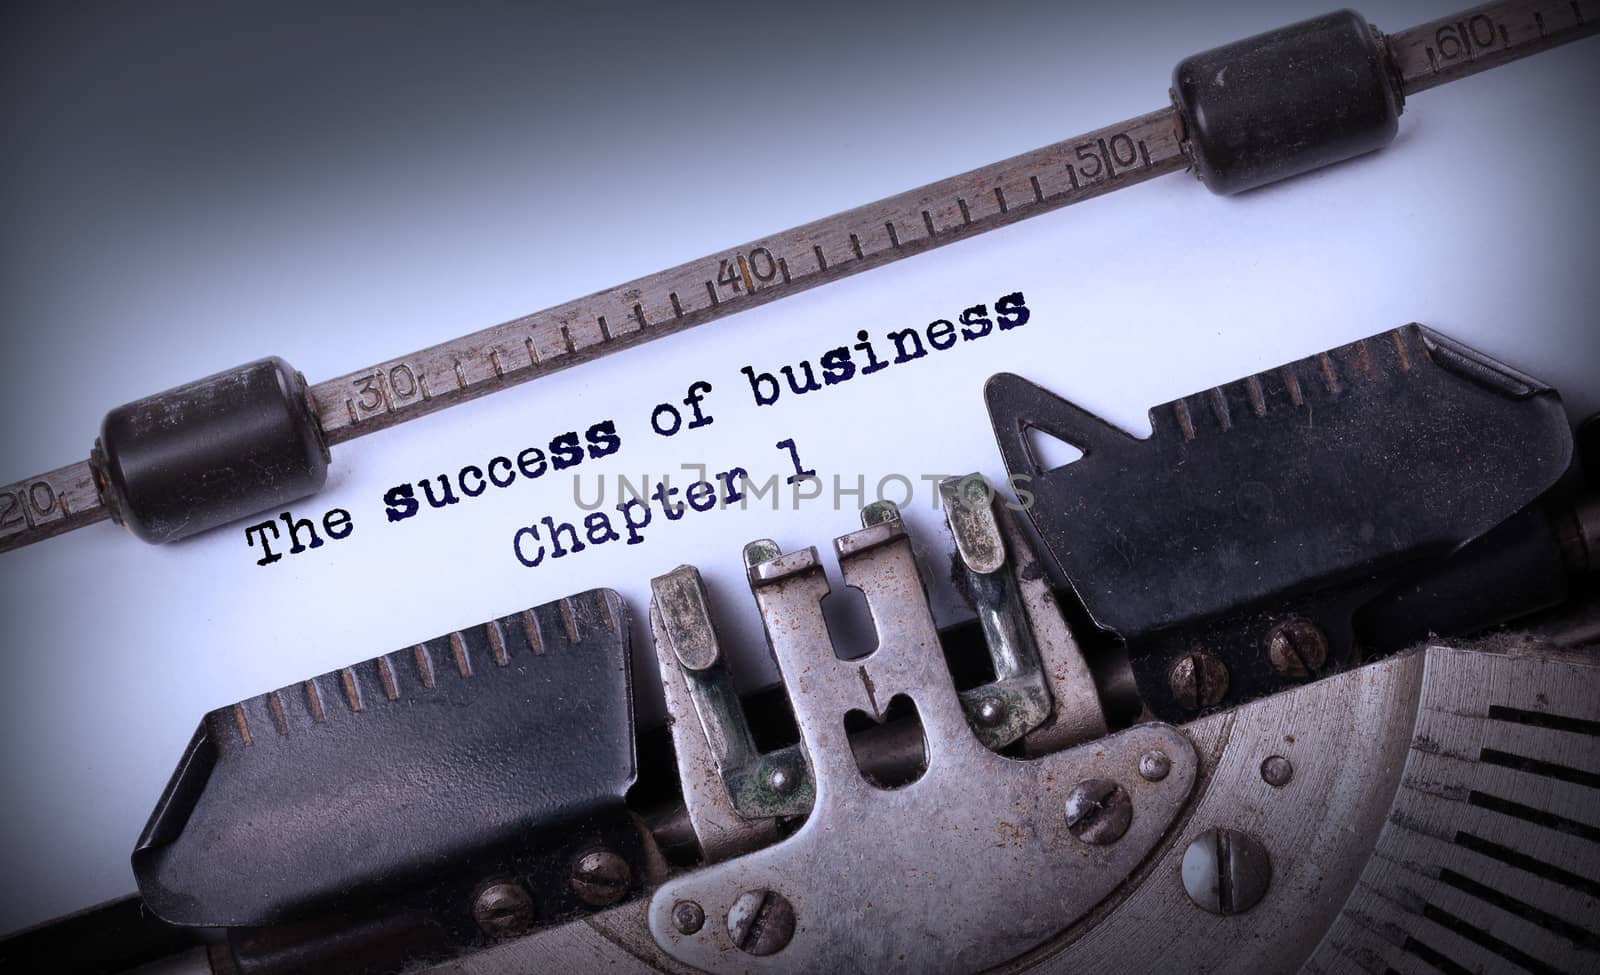 Vintage inscription made by old typewriter, The success of business, chapter 1